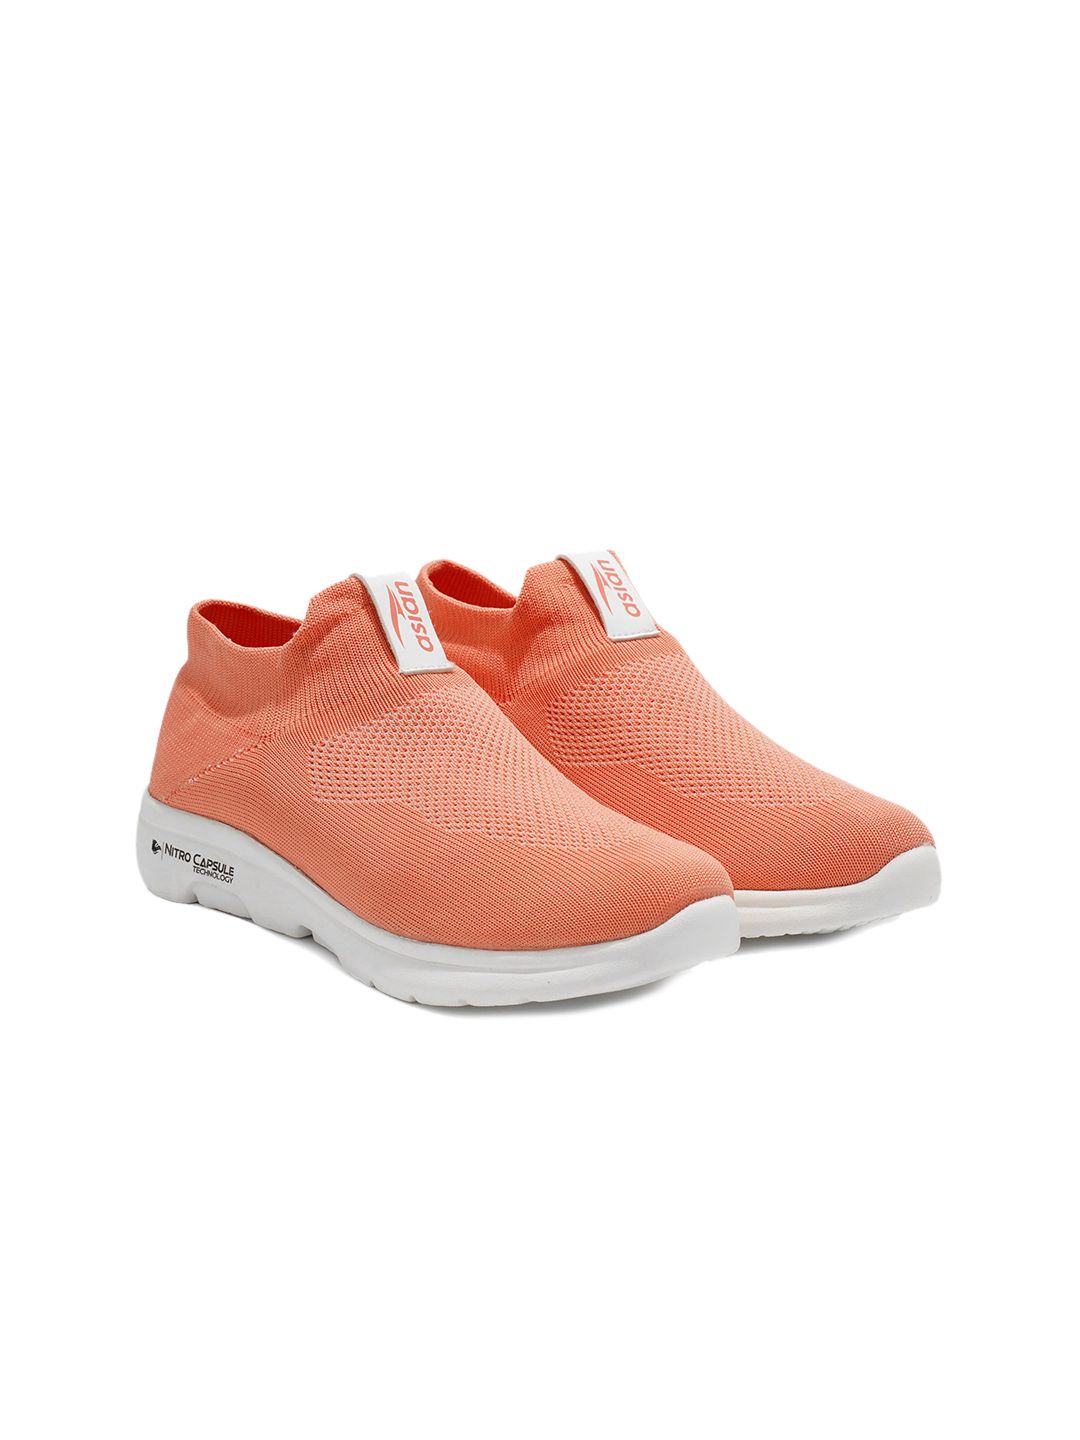 ASIAN Women Peach-Coloured Woven Design Slip-On Sneakers Price in India